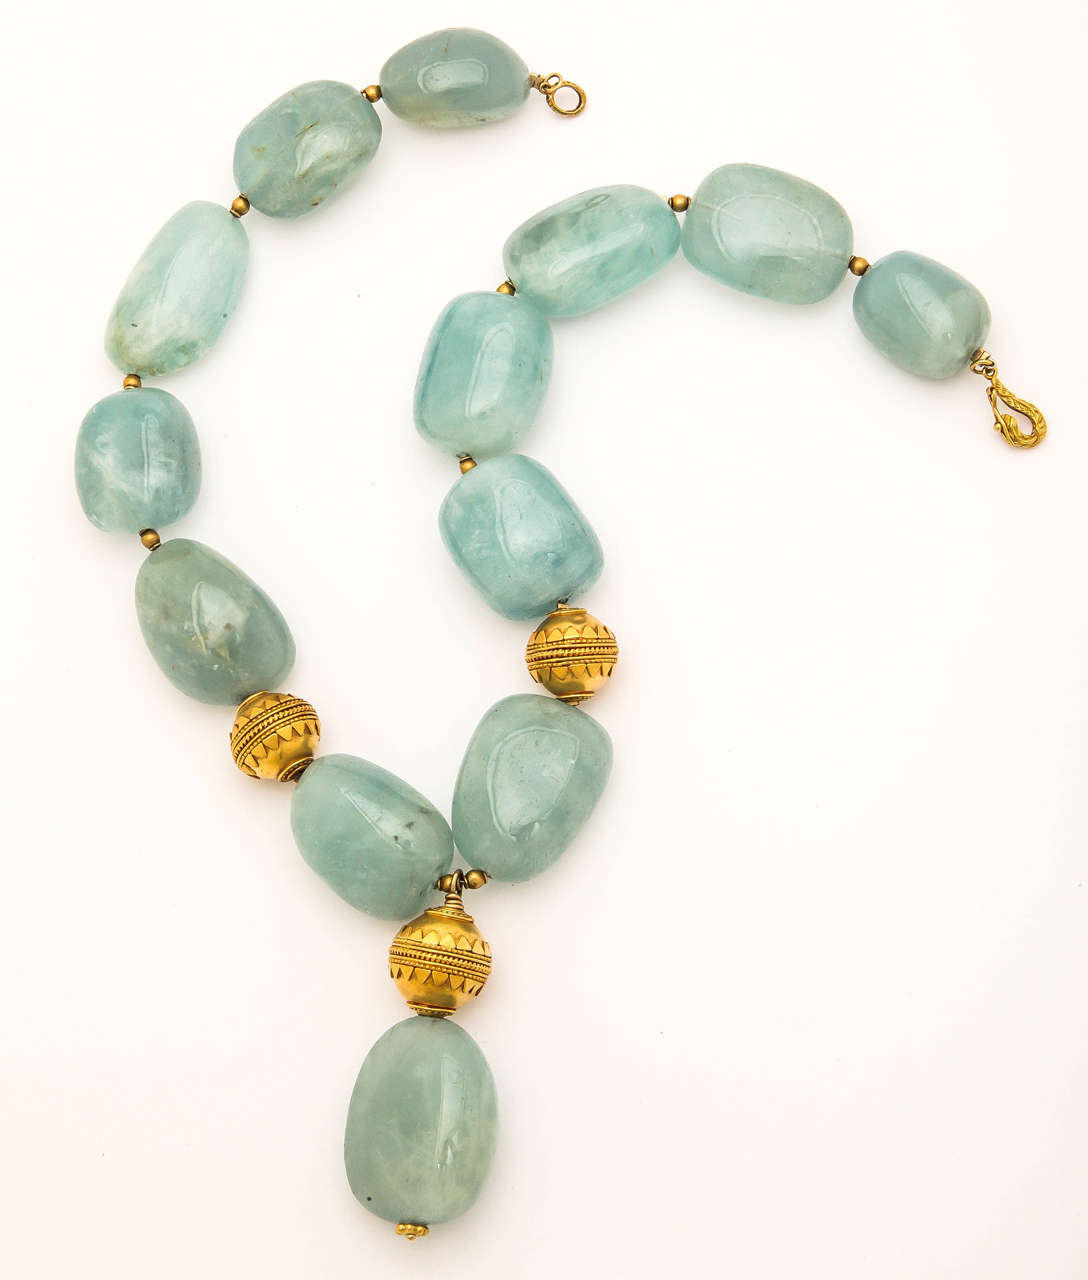 Beautiful , large, smooth aquamarine beads, this size, are rare. The center bead is 1 3/8 in. long.The total length of the necklace is 16 in. and can be lengthened. The gold beads are 18 kt , the largest are 3/4in. in diameter. The clasp is also